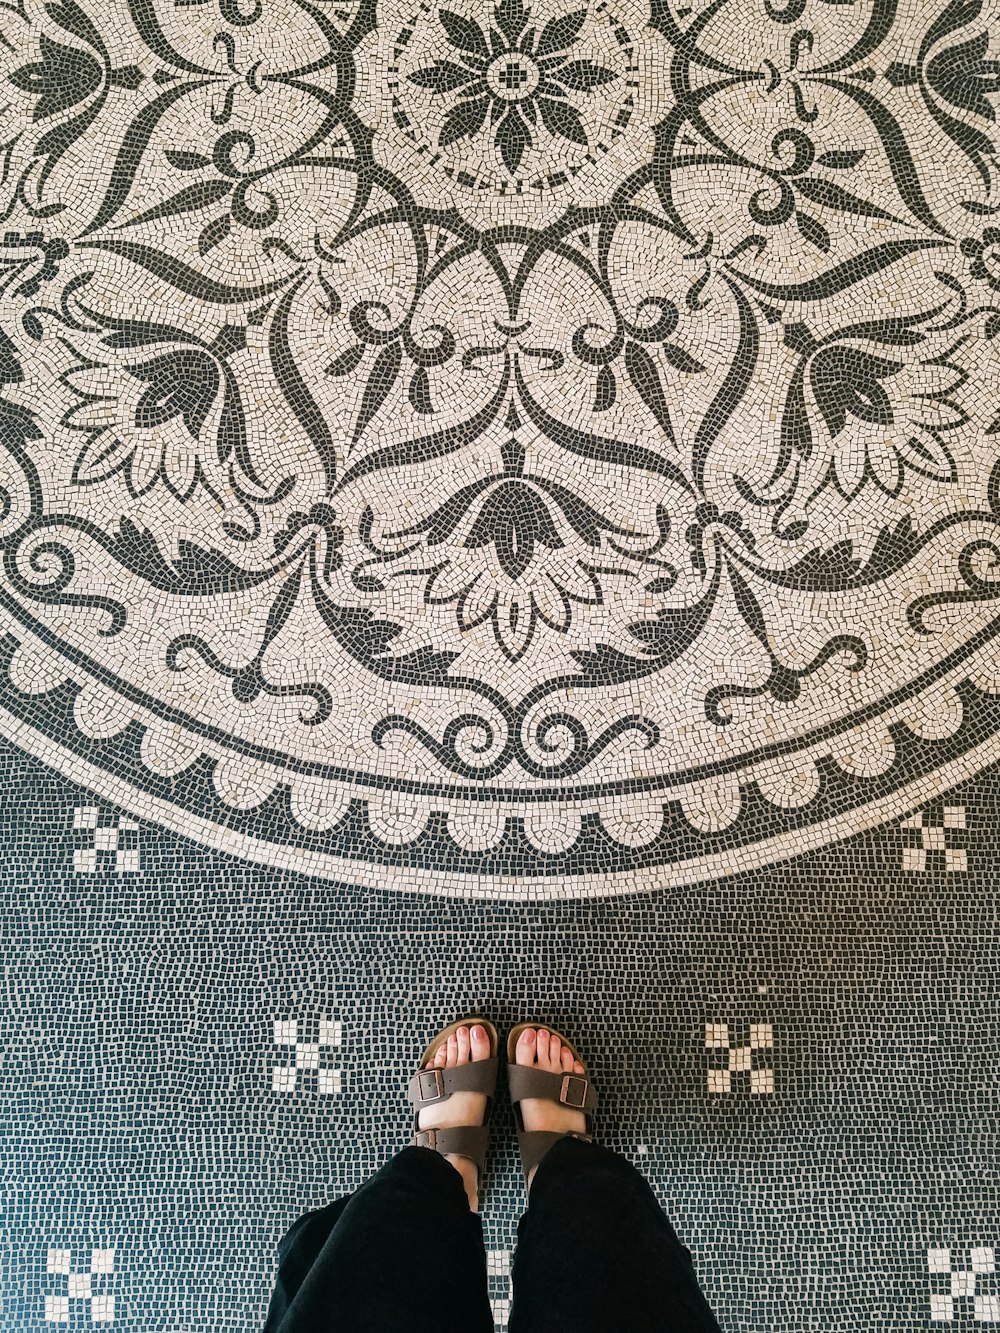 person wearing black flip flops standing on gray and black area rug